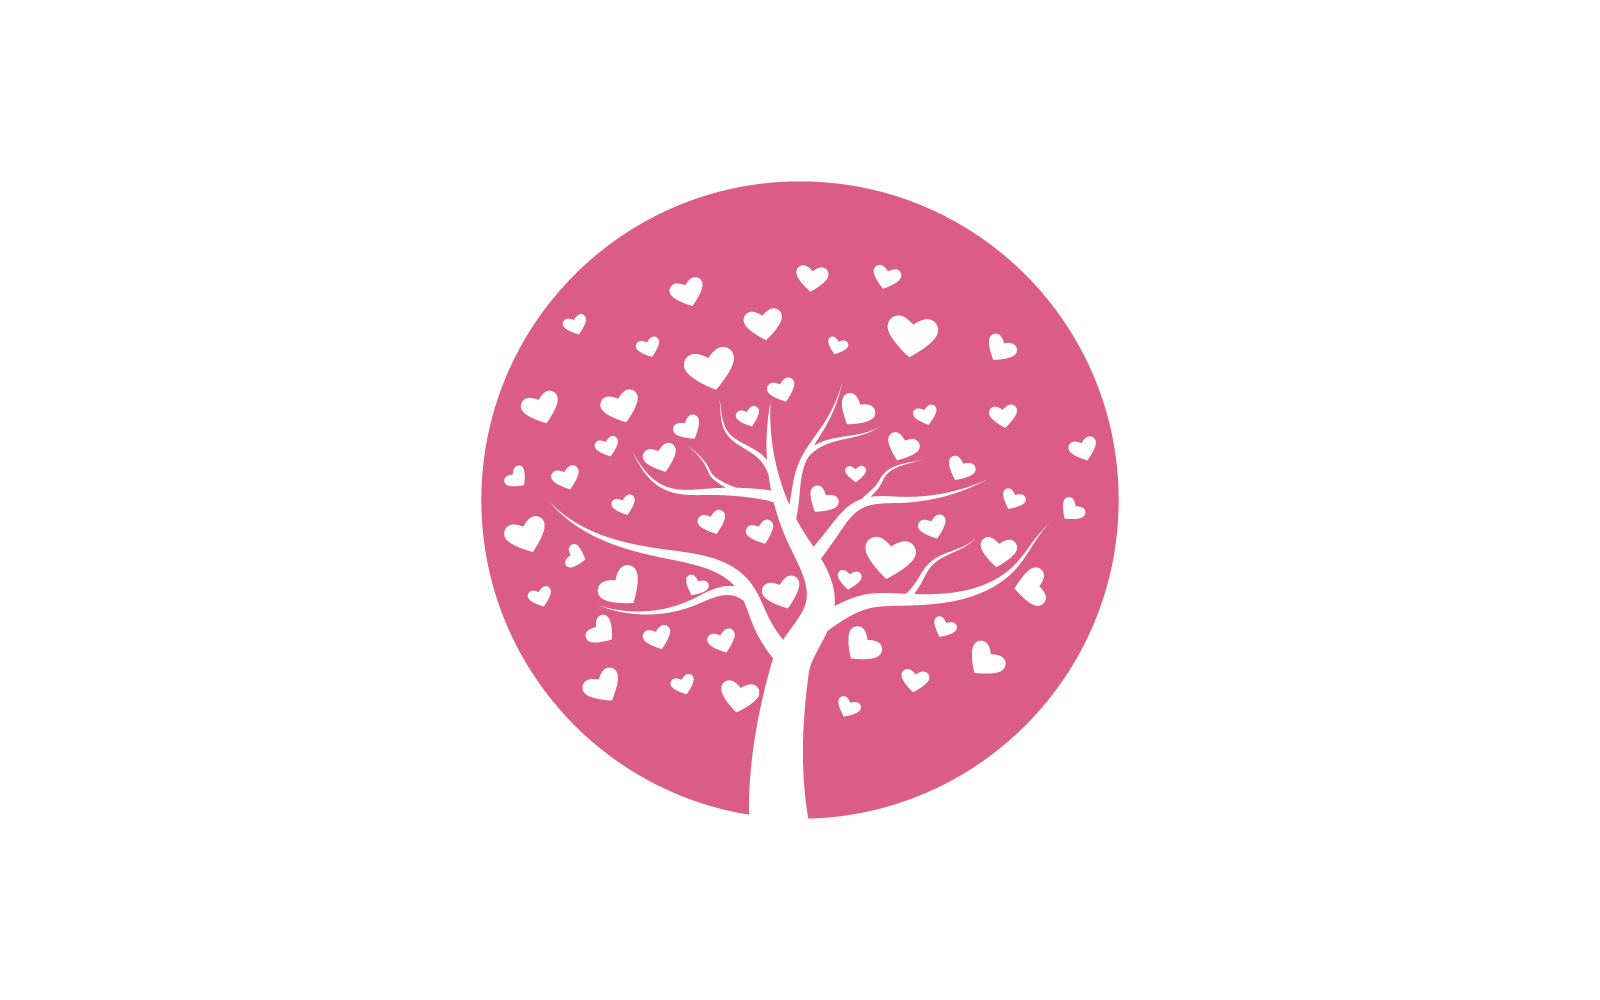 Love Tree With Heart Leaves Vector Illustration